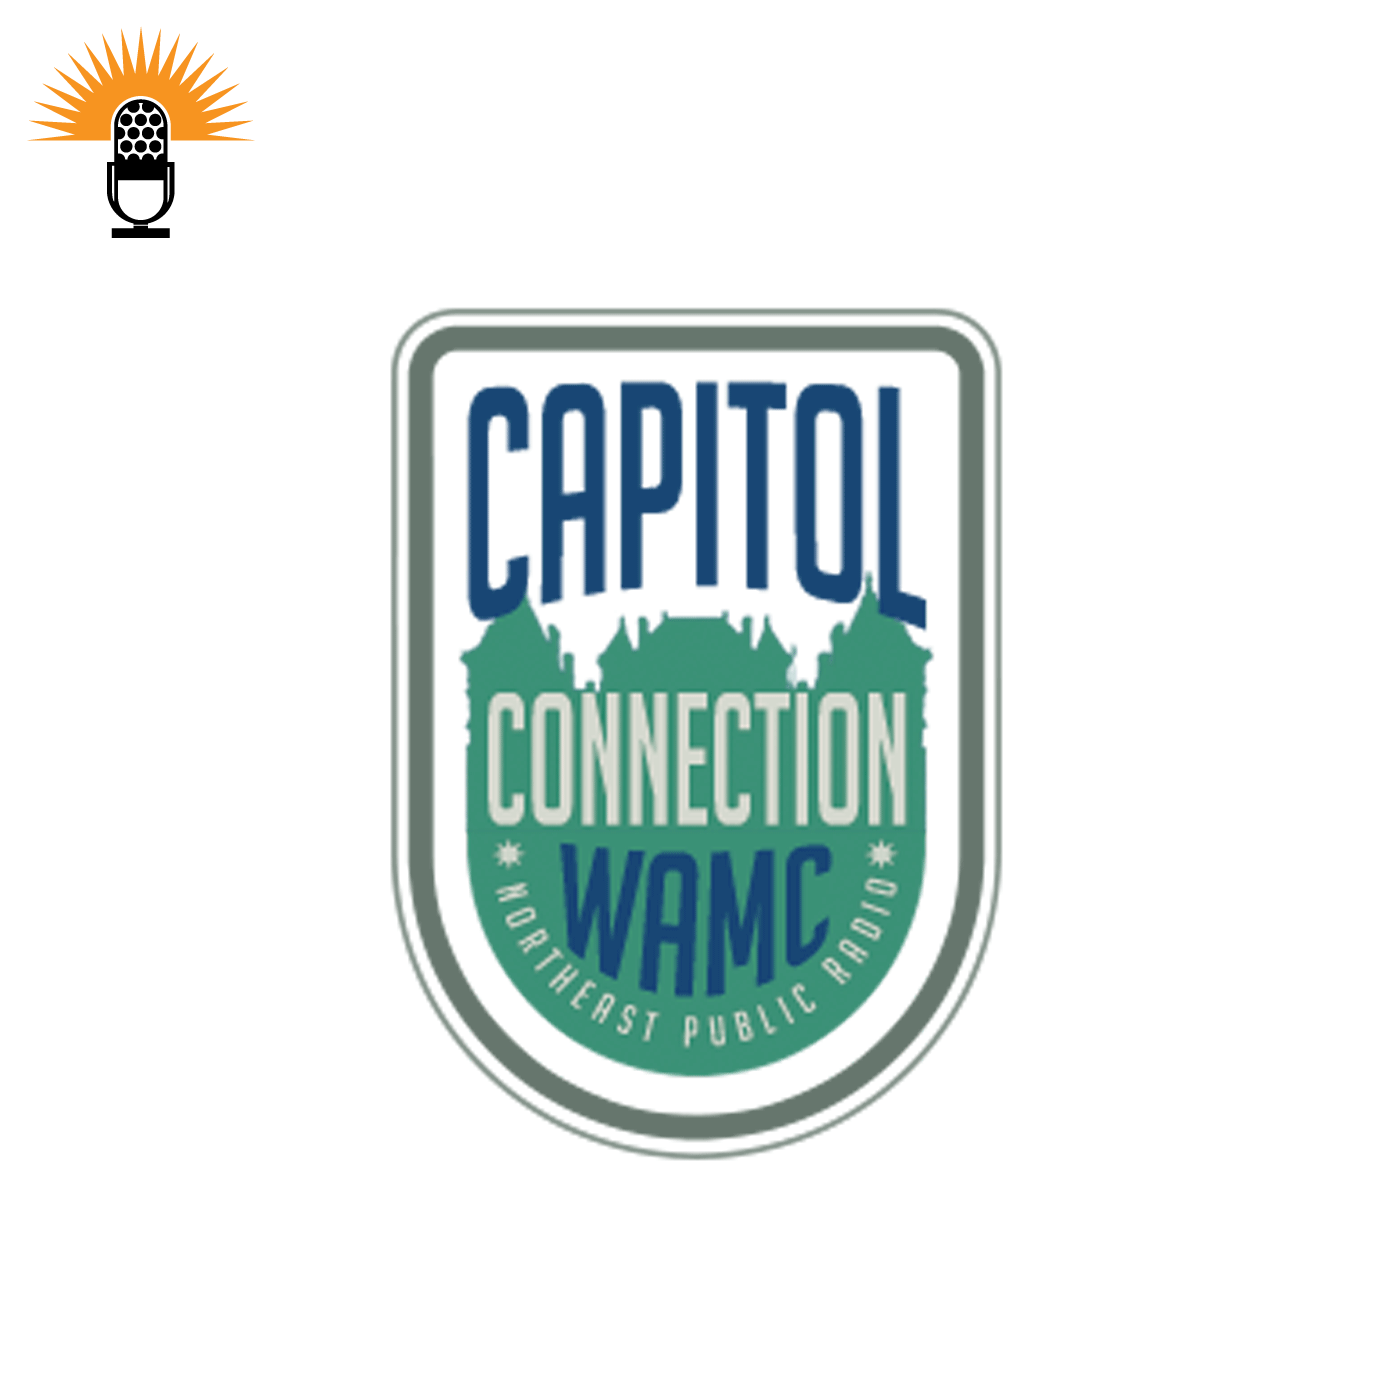 The Capitol Connection #2330 - Amanda Babine, Executive Director of Equality New York